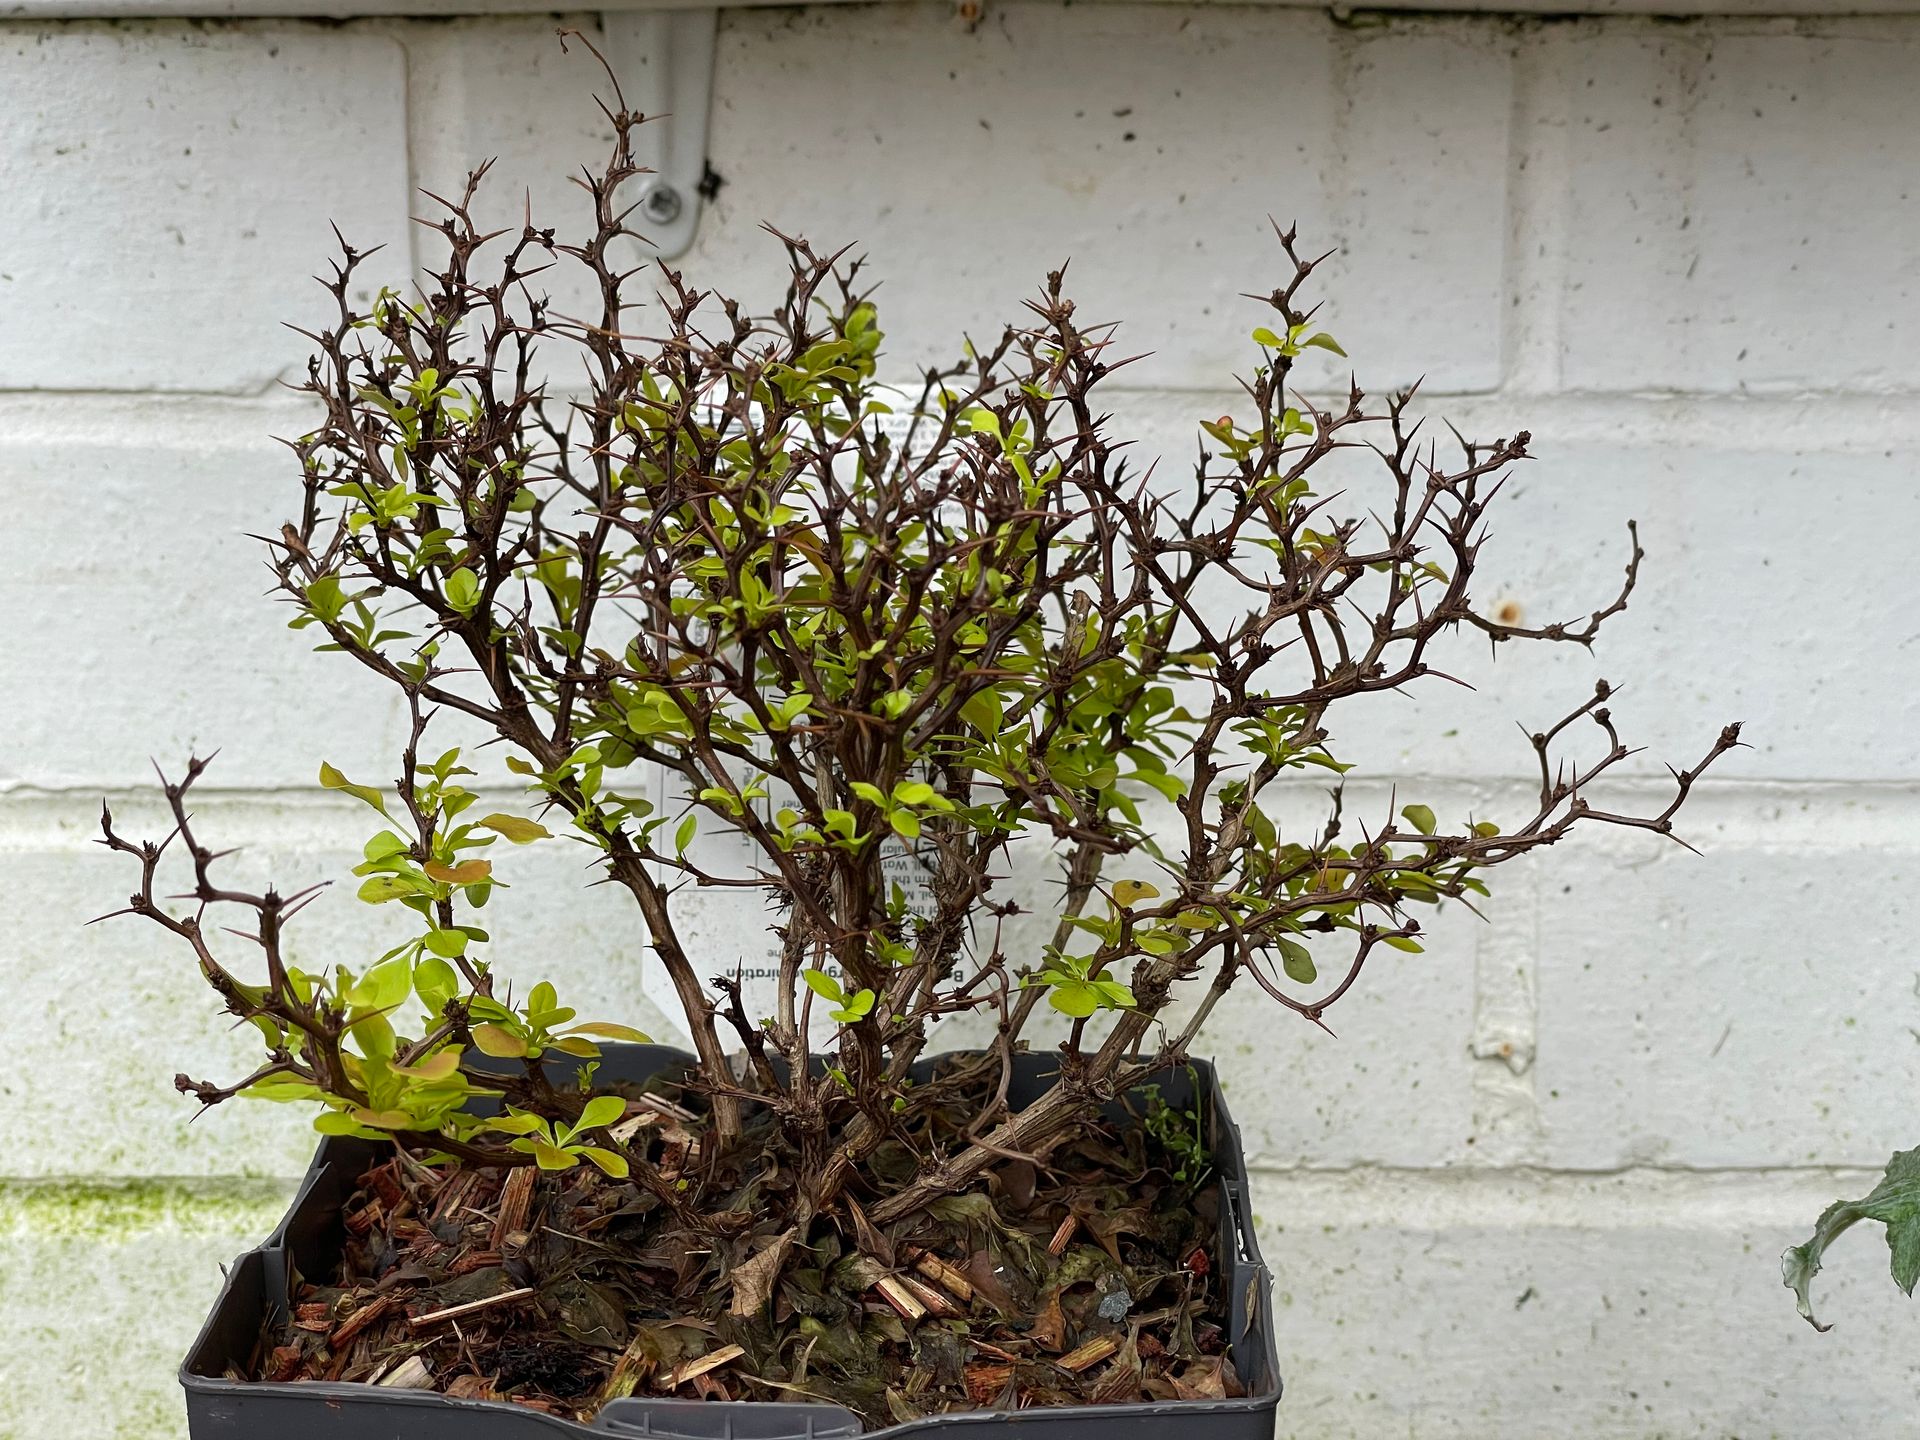 Berberis plant in a container against a white-painted brick wall